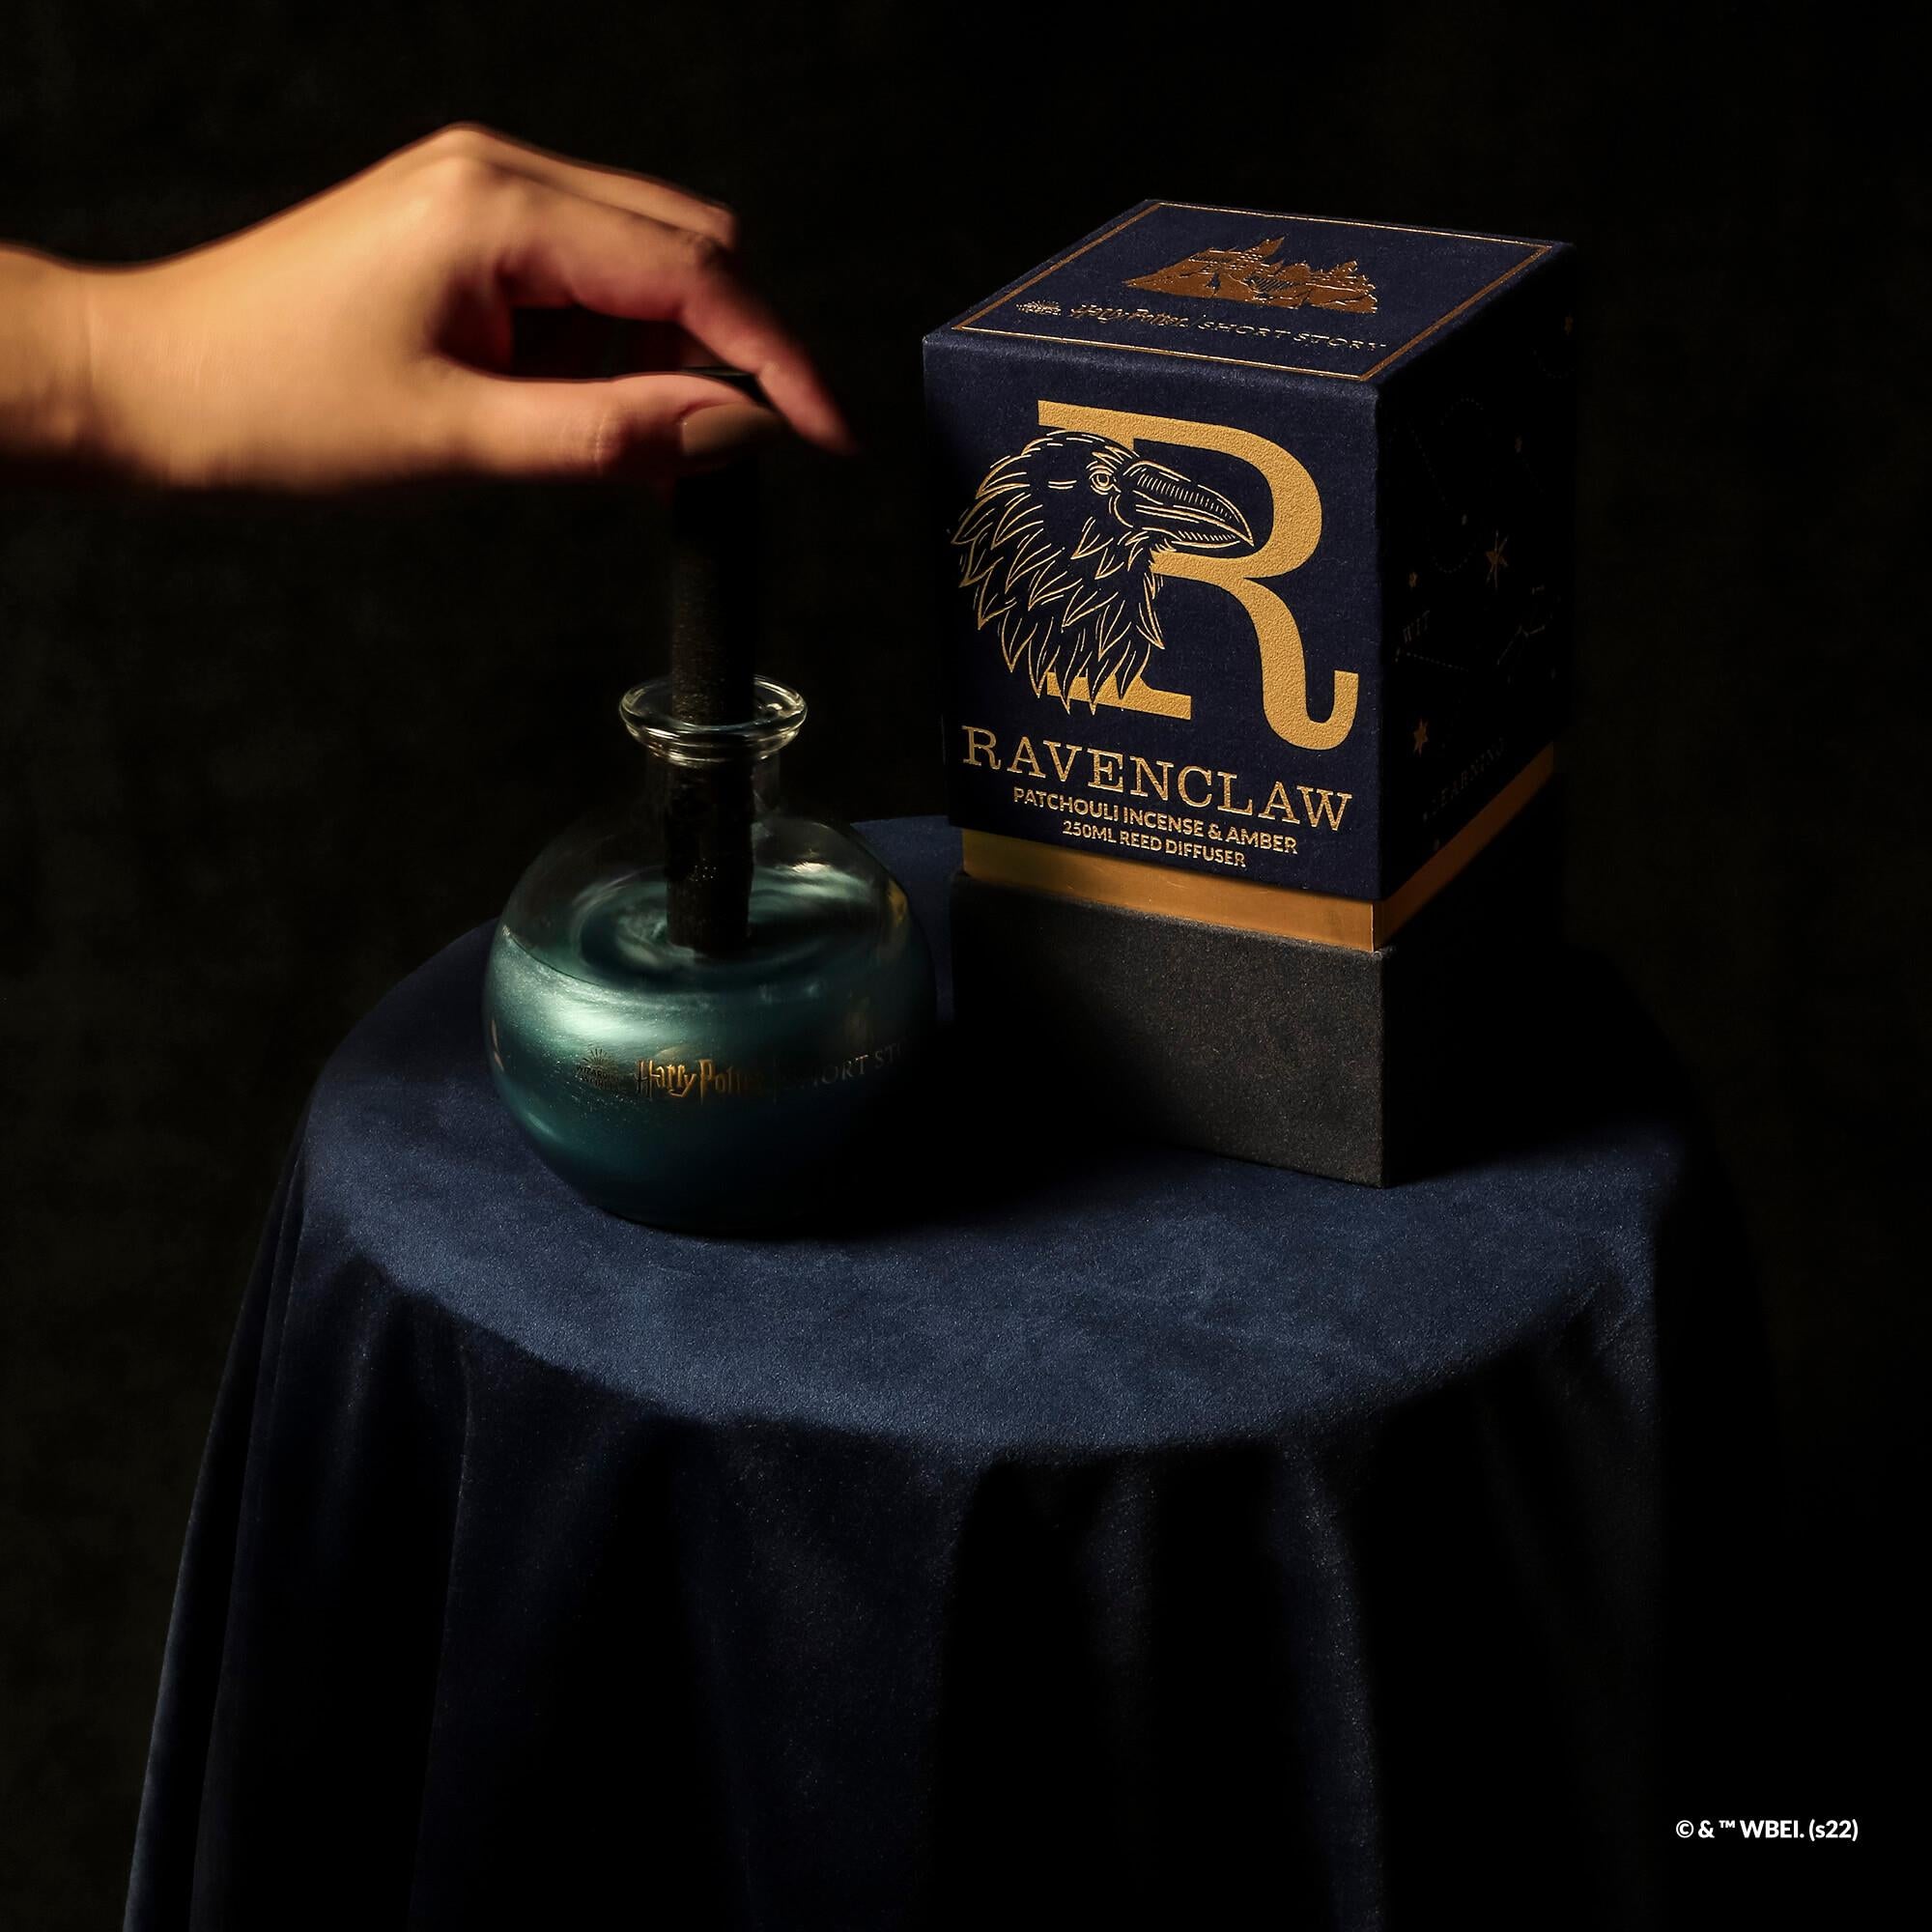 Short Story - Harry Potter Diffuser Ravenclaw